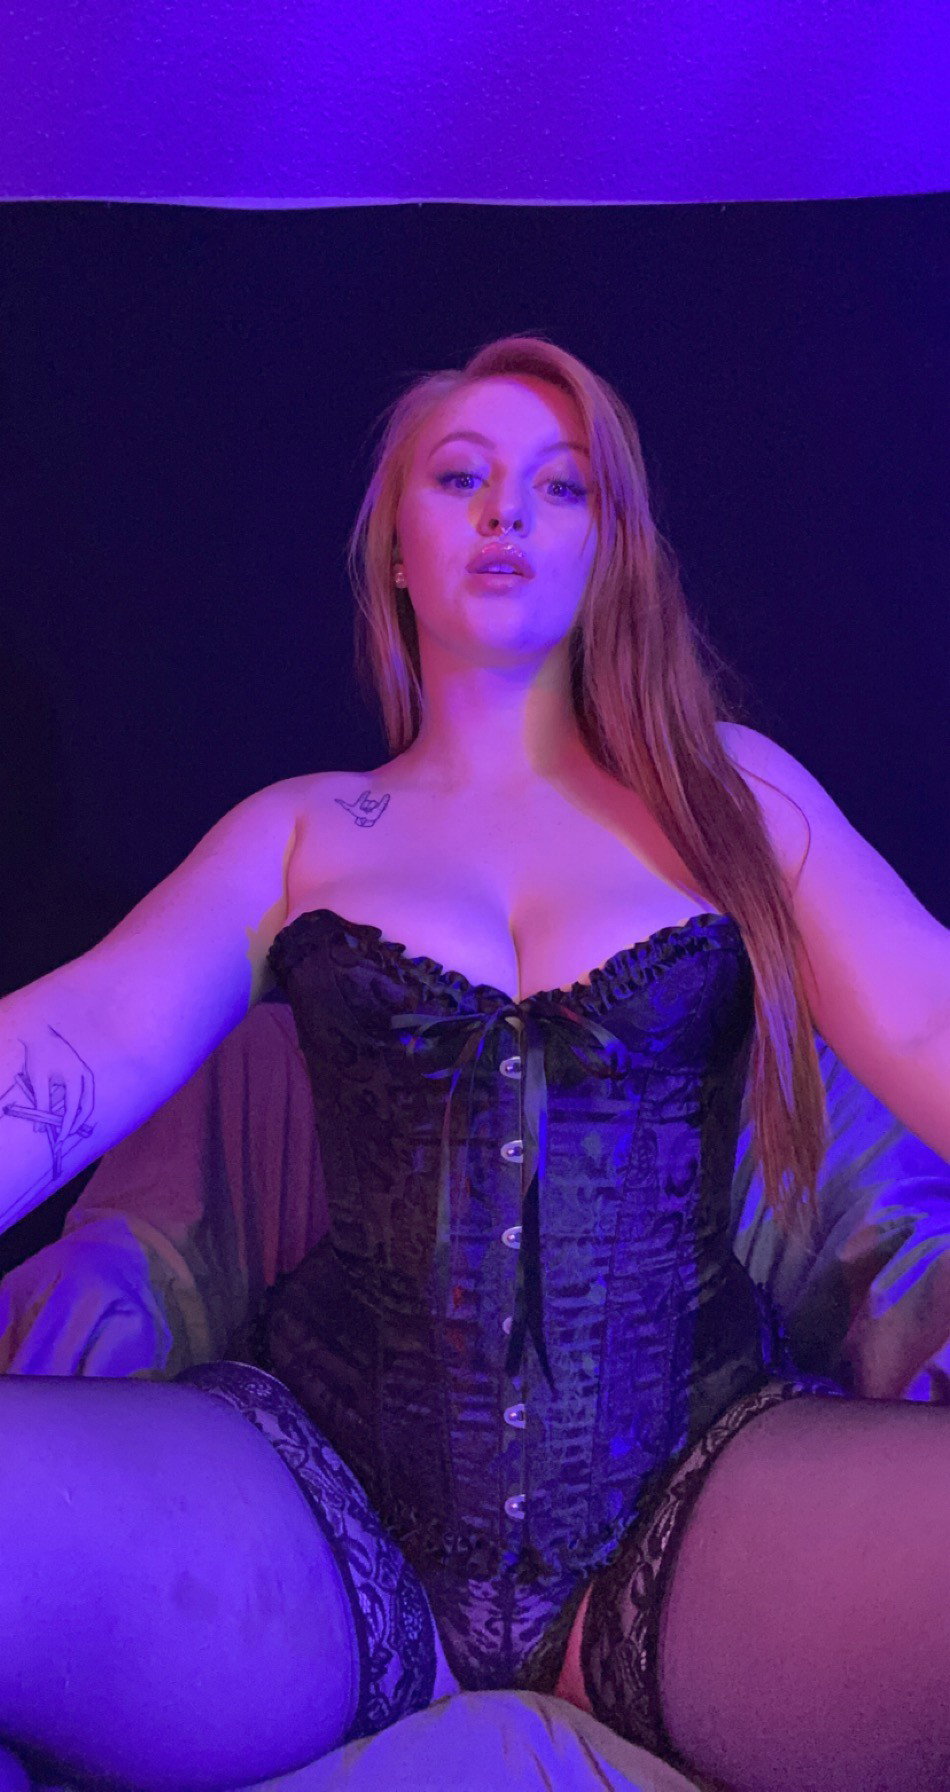 Watch the Photo by Scarlet Red with the username @ScarletRed, who is a star user, posted on November 8, 2020. The post is about the topic Rough Sex. and the text says '100 likes and 50 shares, and ill post with me breaking in my new toys😈🤤'